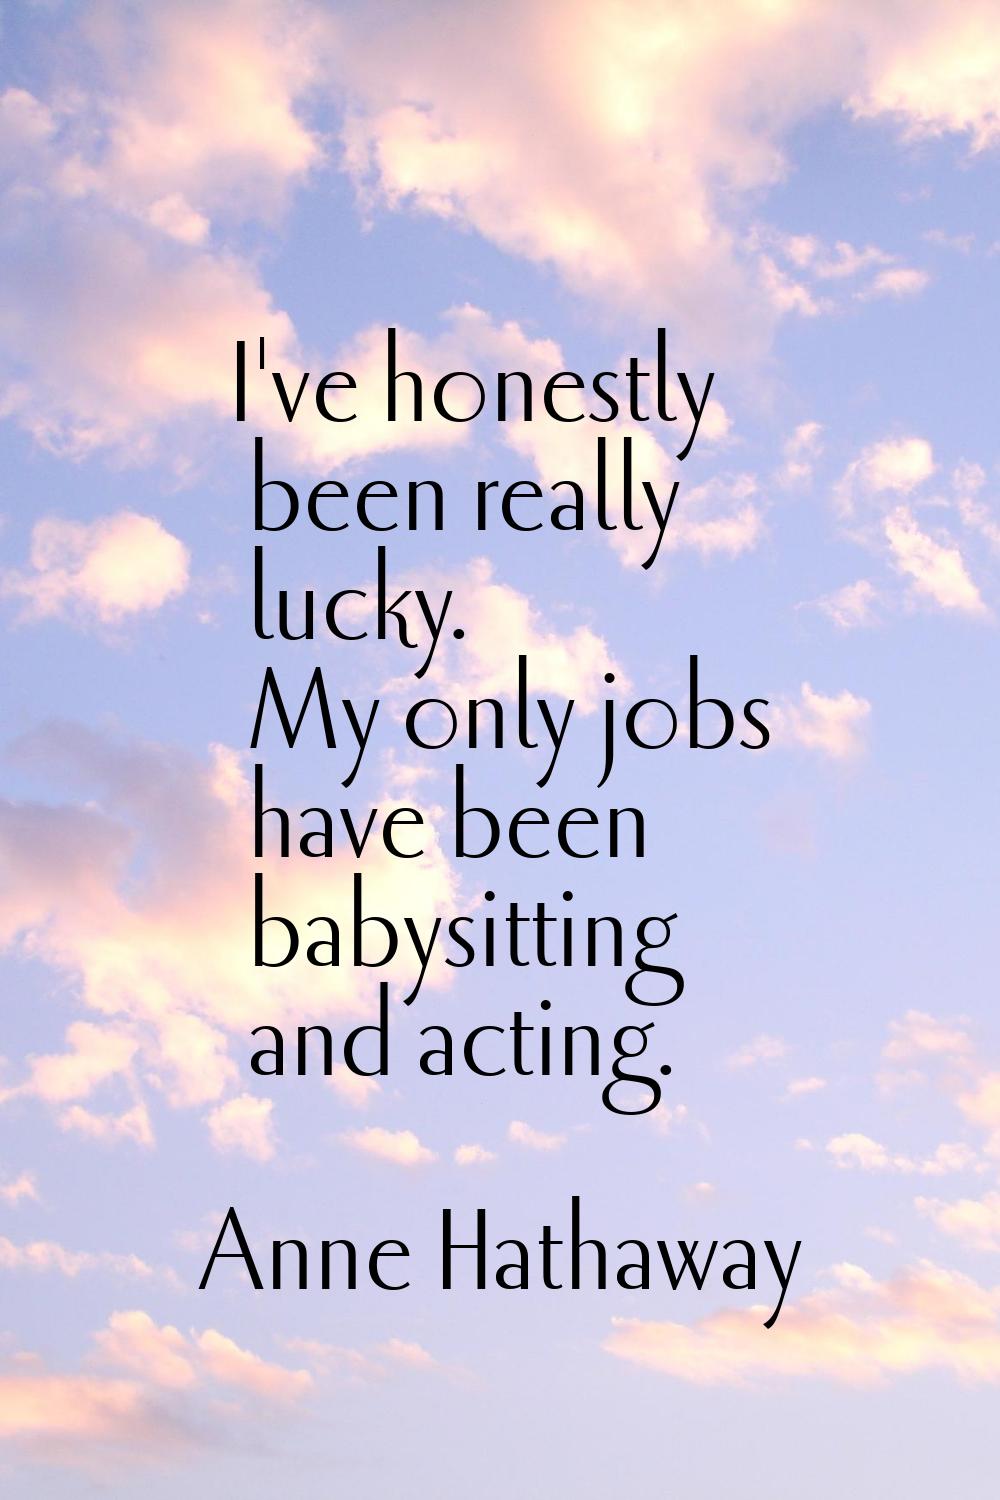 I've honestly been really lucky. My only jobs have been babysitting and acting.